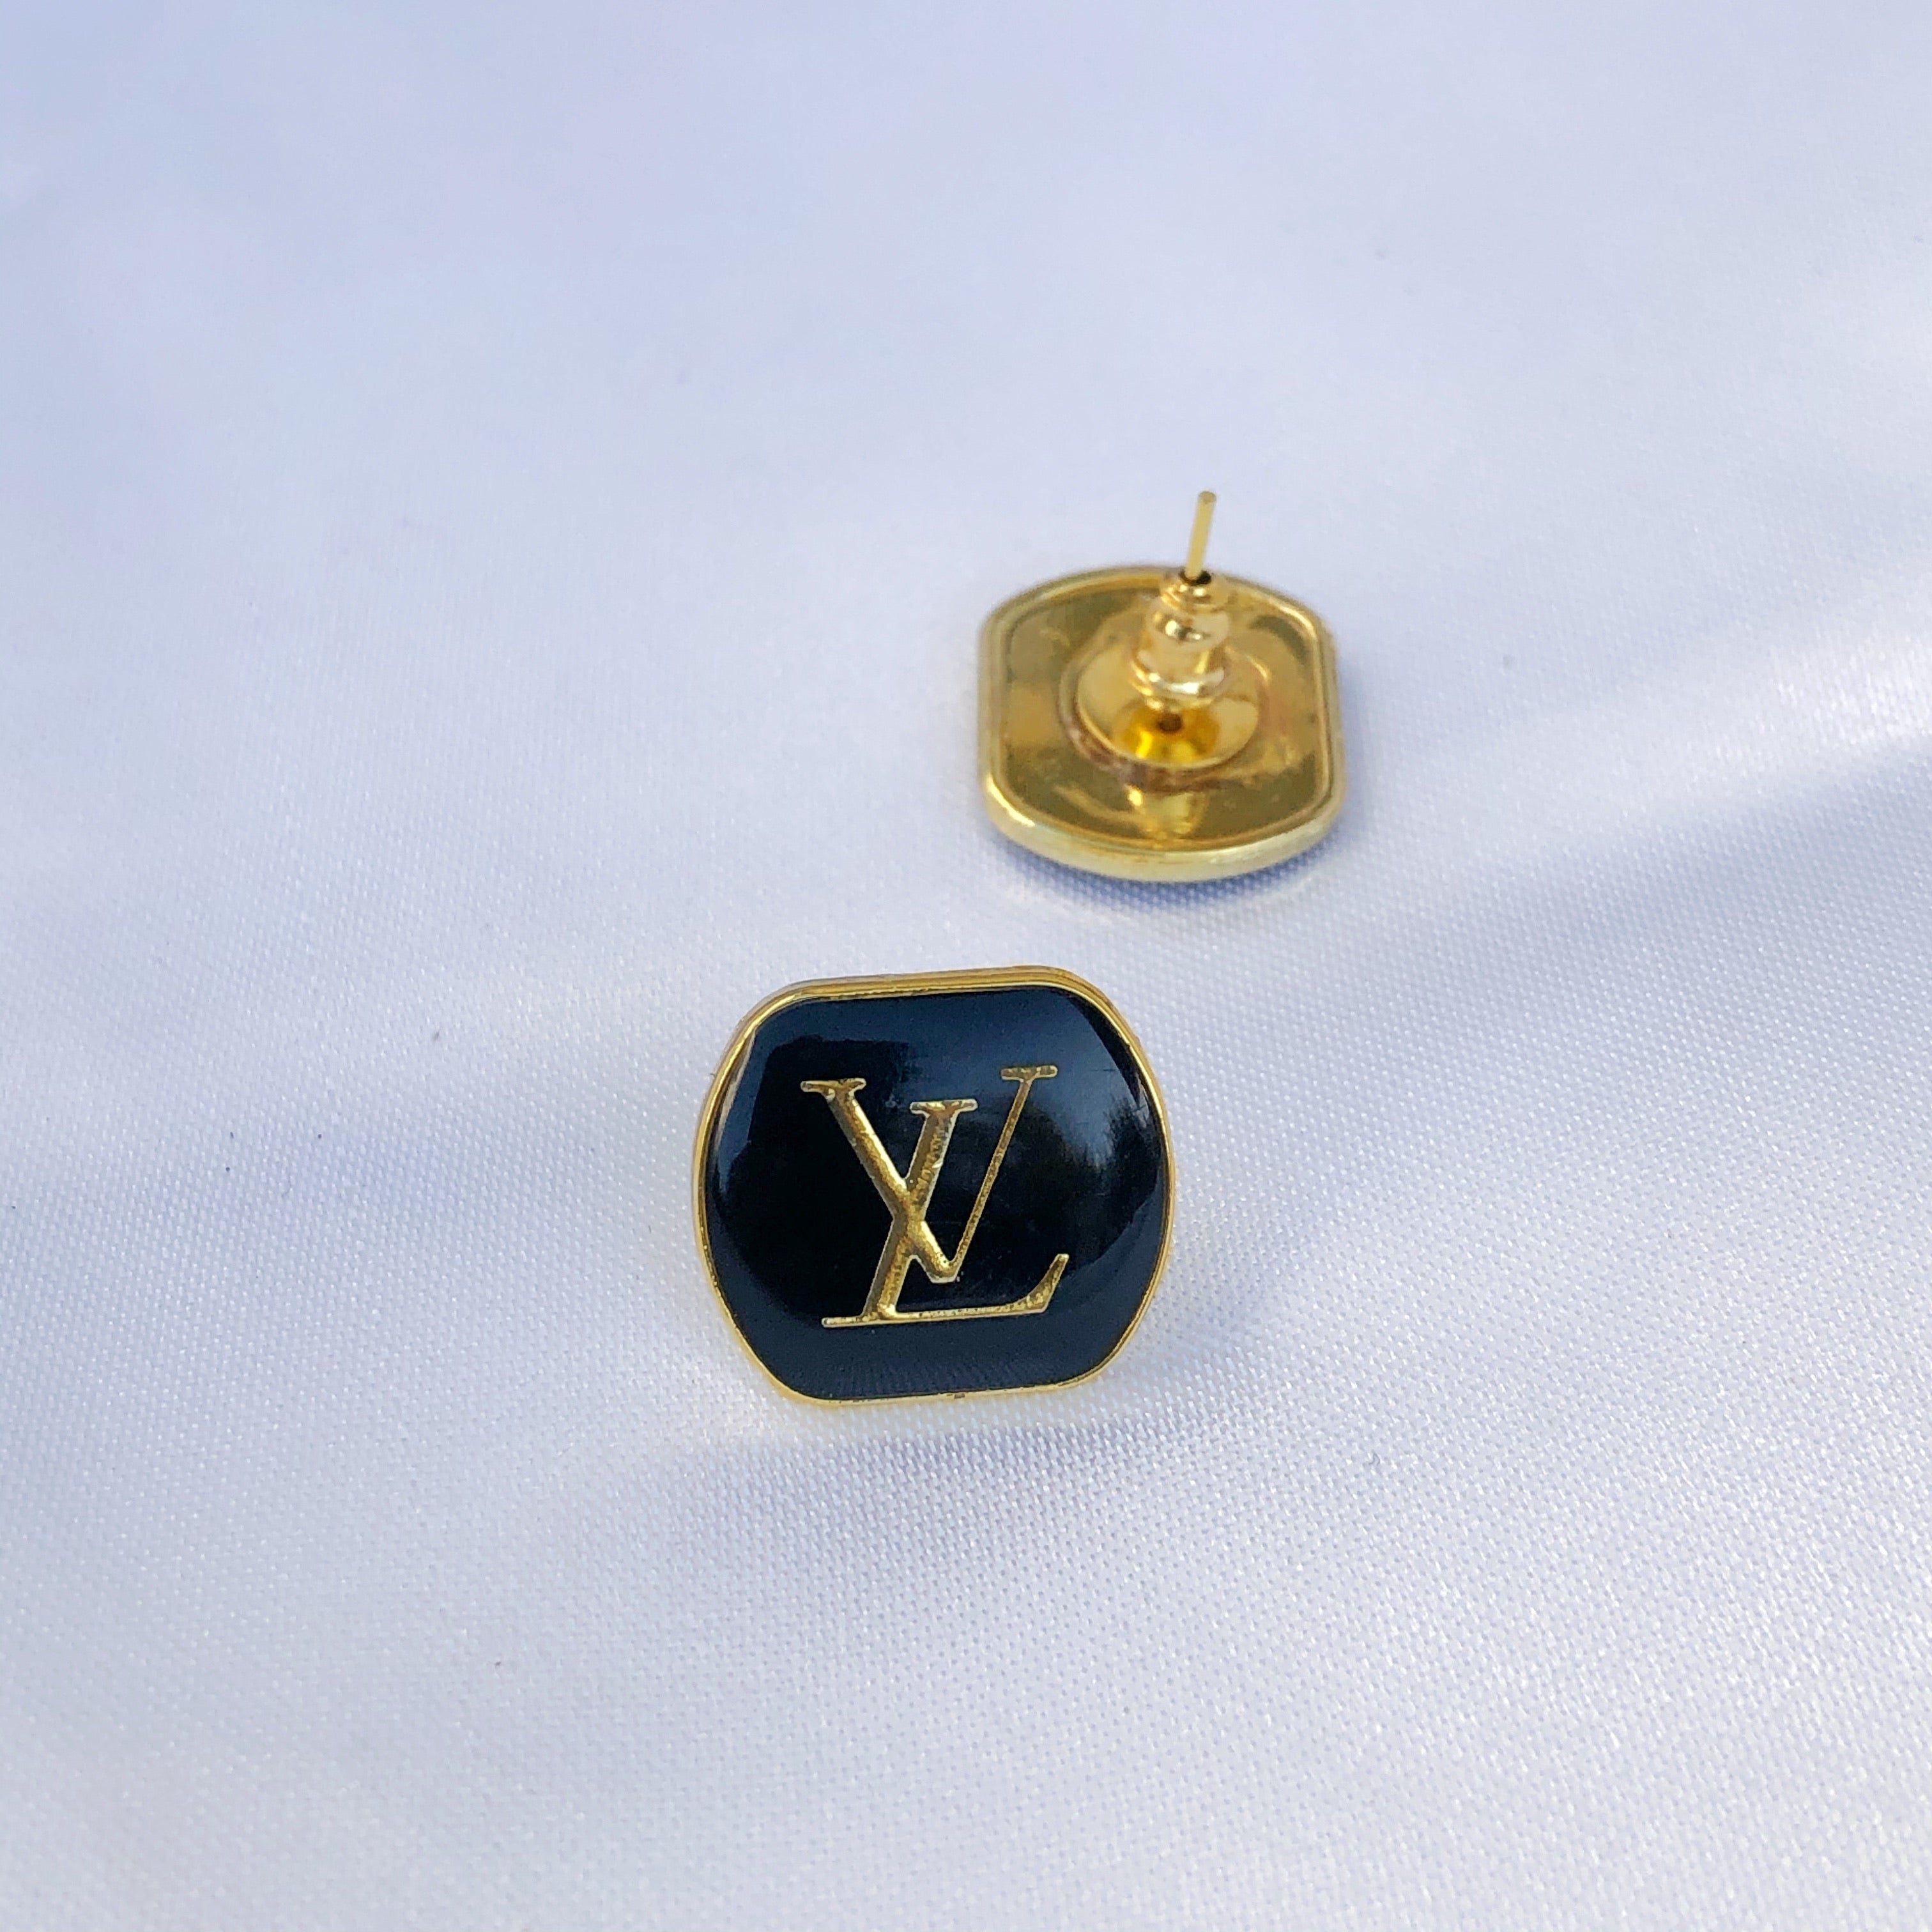 Authentic Stylish Studs Louis Vuitton Earrings